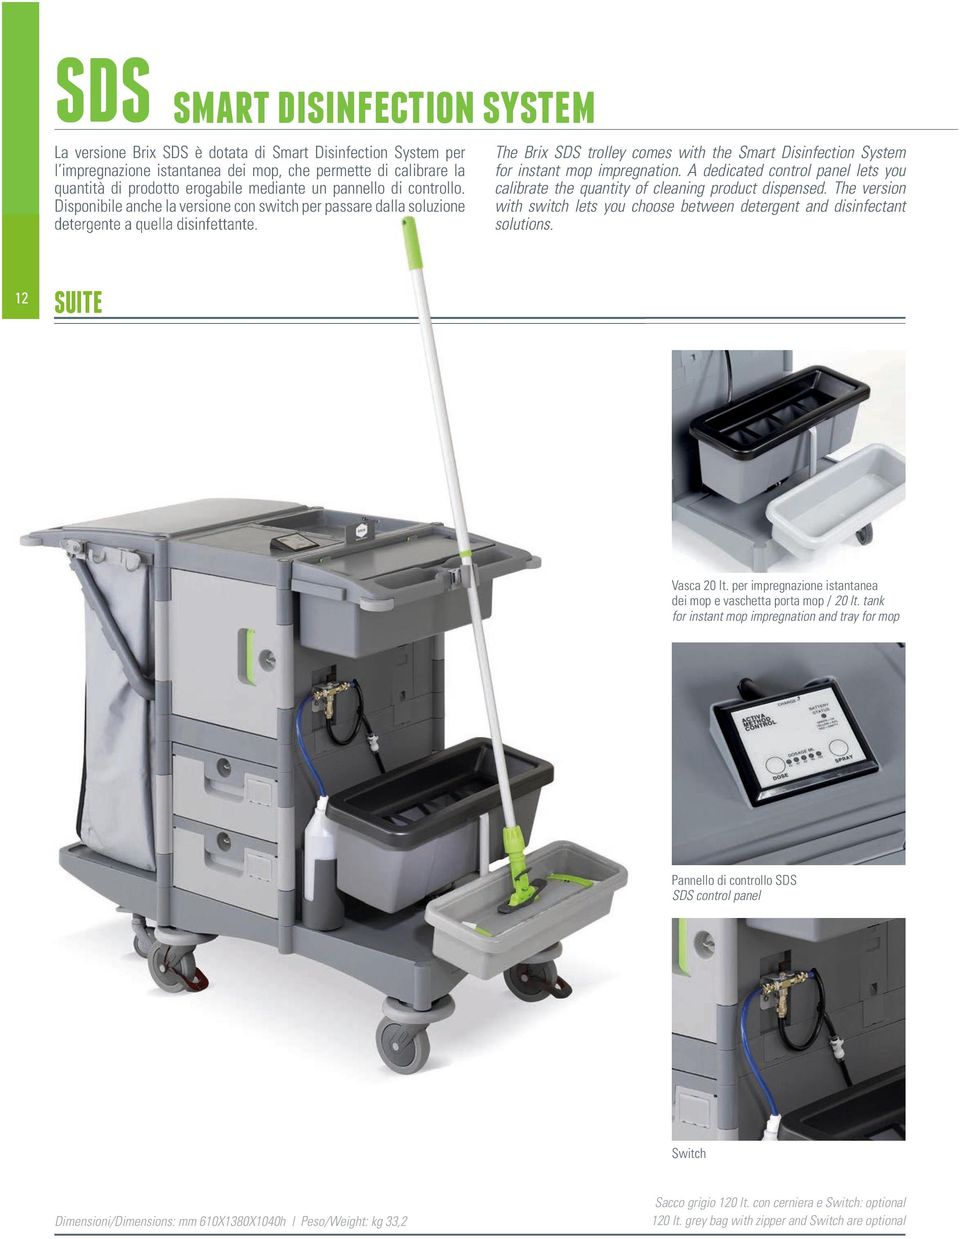 The Brix SDS trolley comes with the Smart Disinfection System for instant mop impregnation. A dedicated control panel lets you calibrate the quantity of cleaning product dispensed.